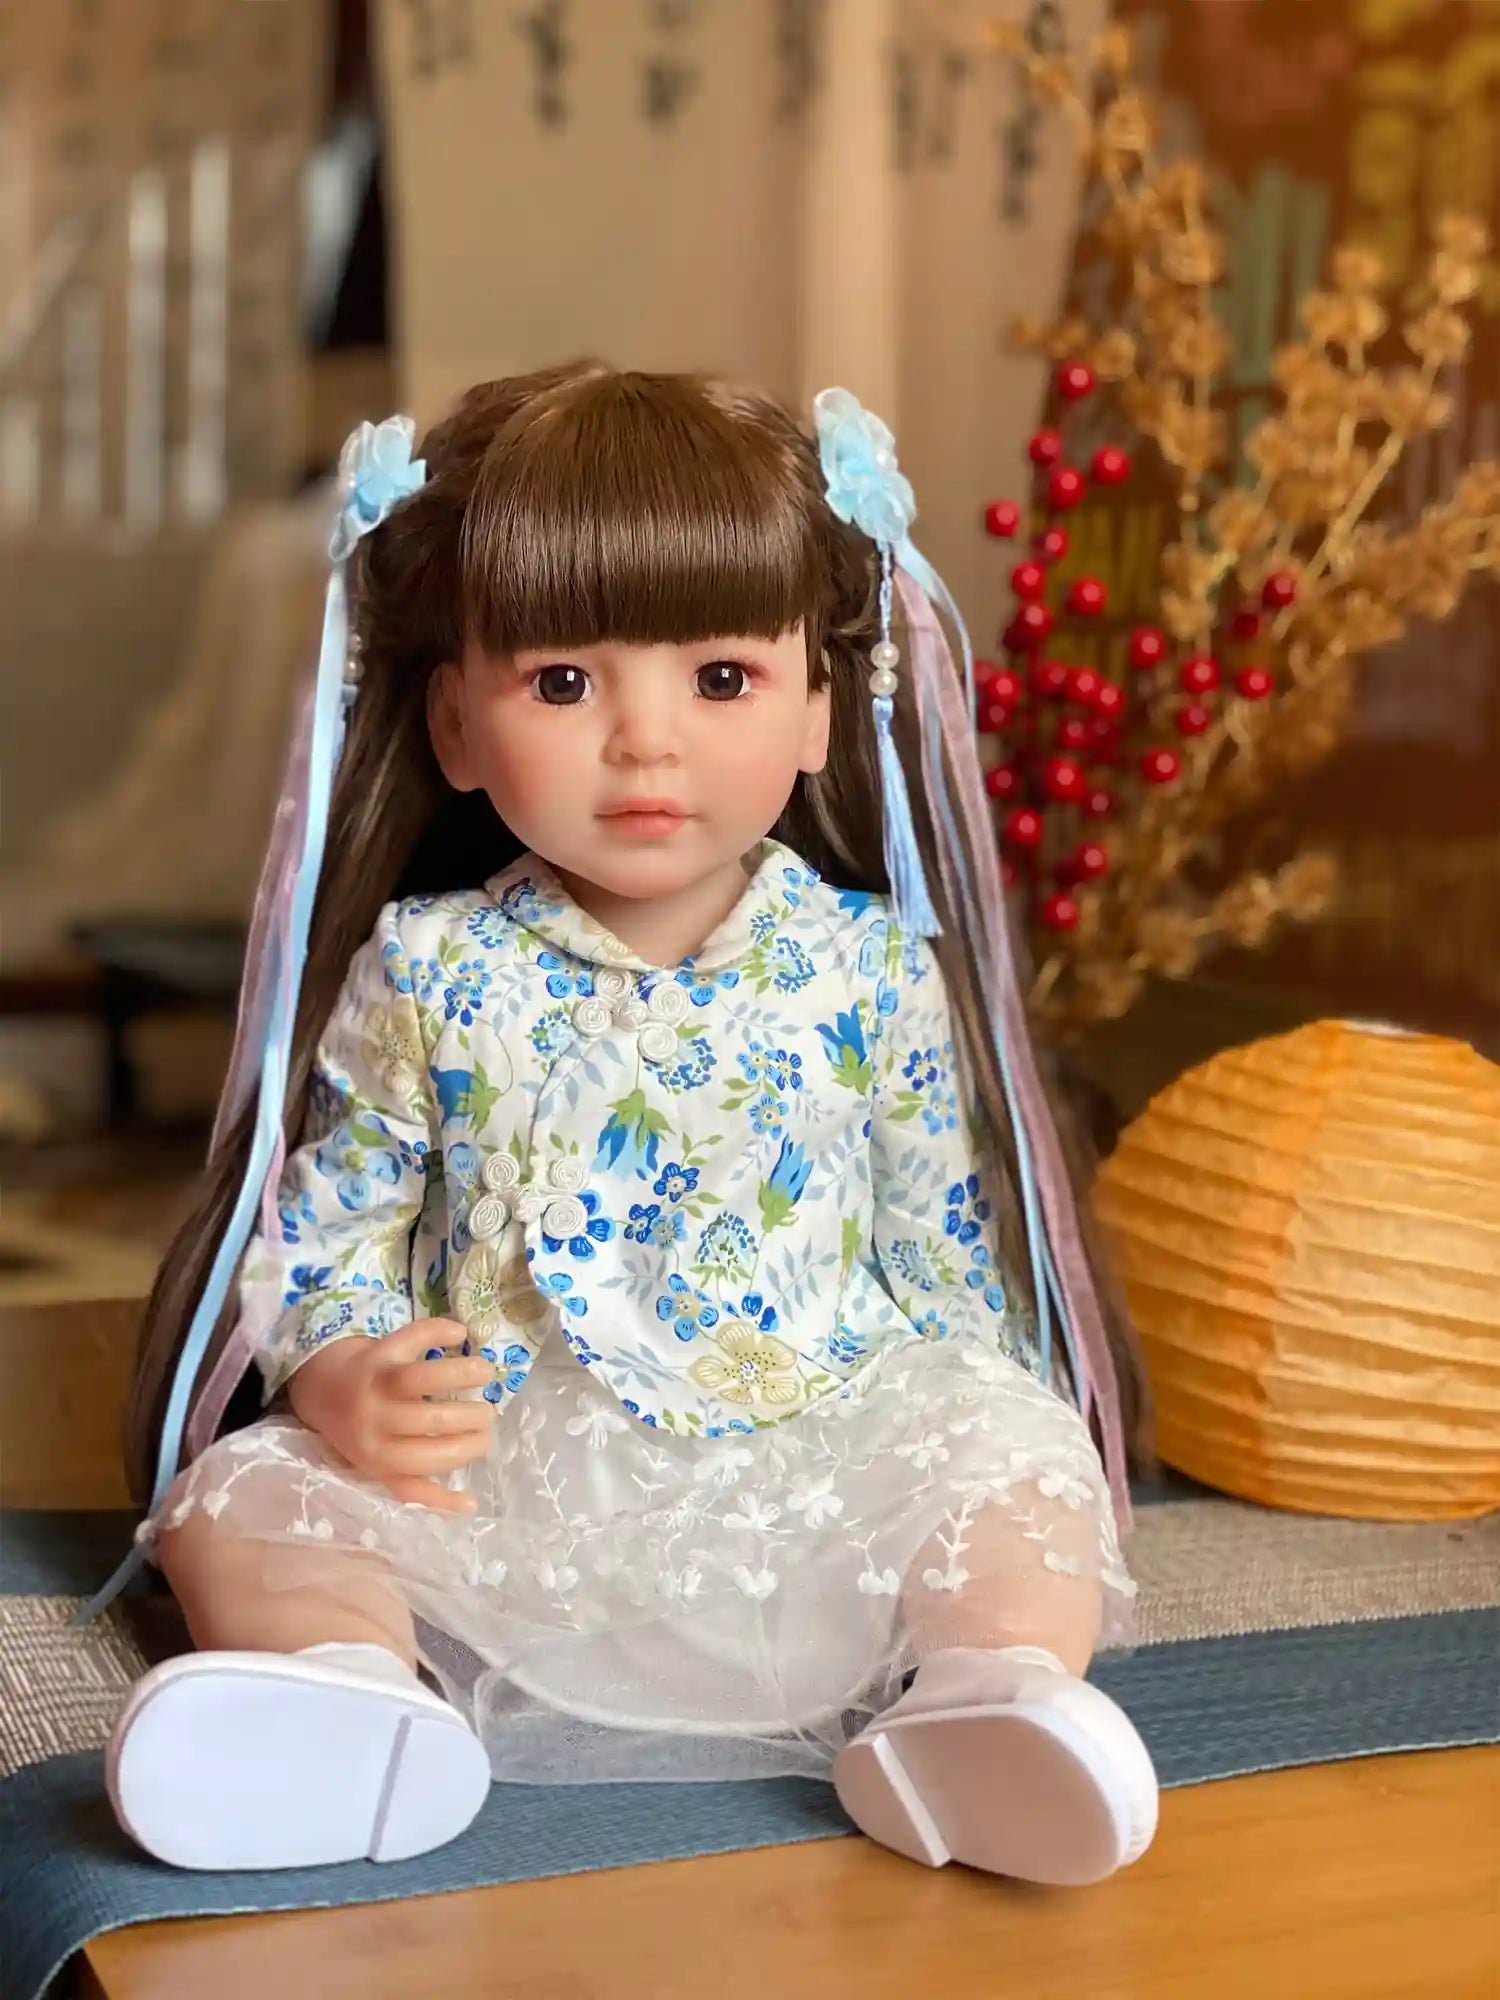 Toddler doll standing, partially hidden by a blue veil, wearing a blue floral dress and white shoes, indoors.